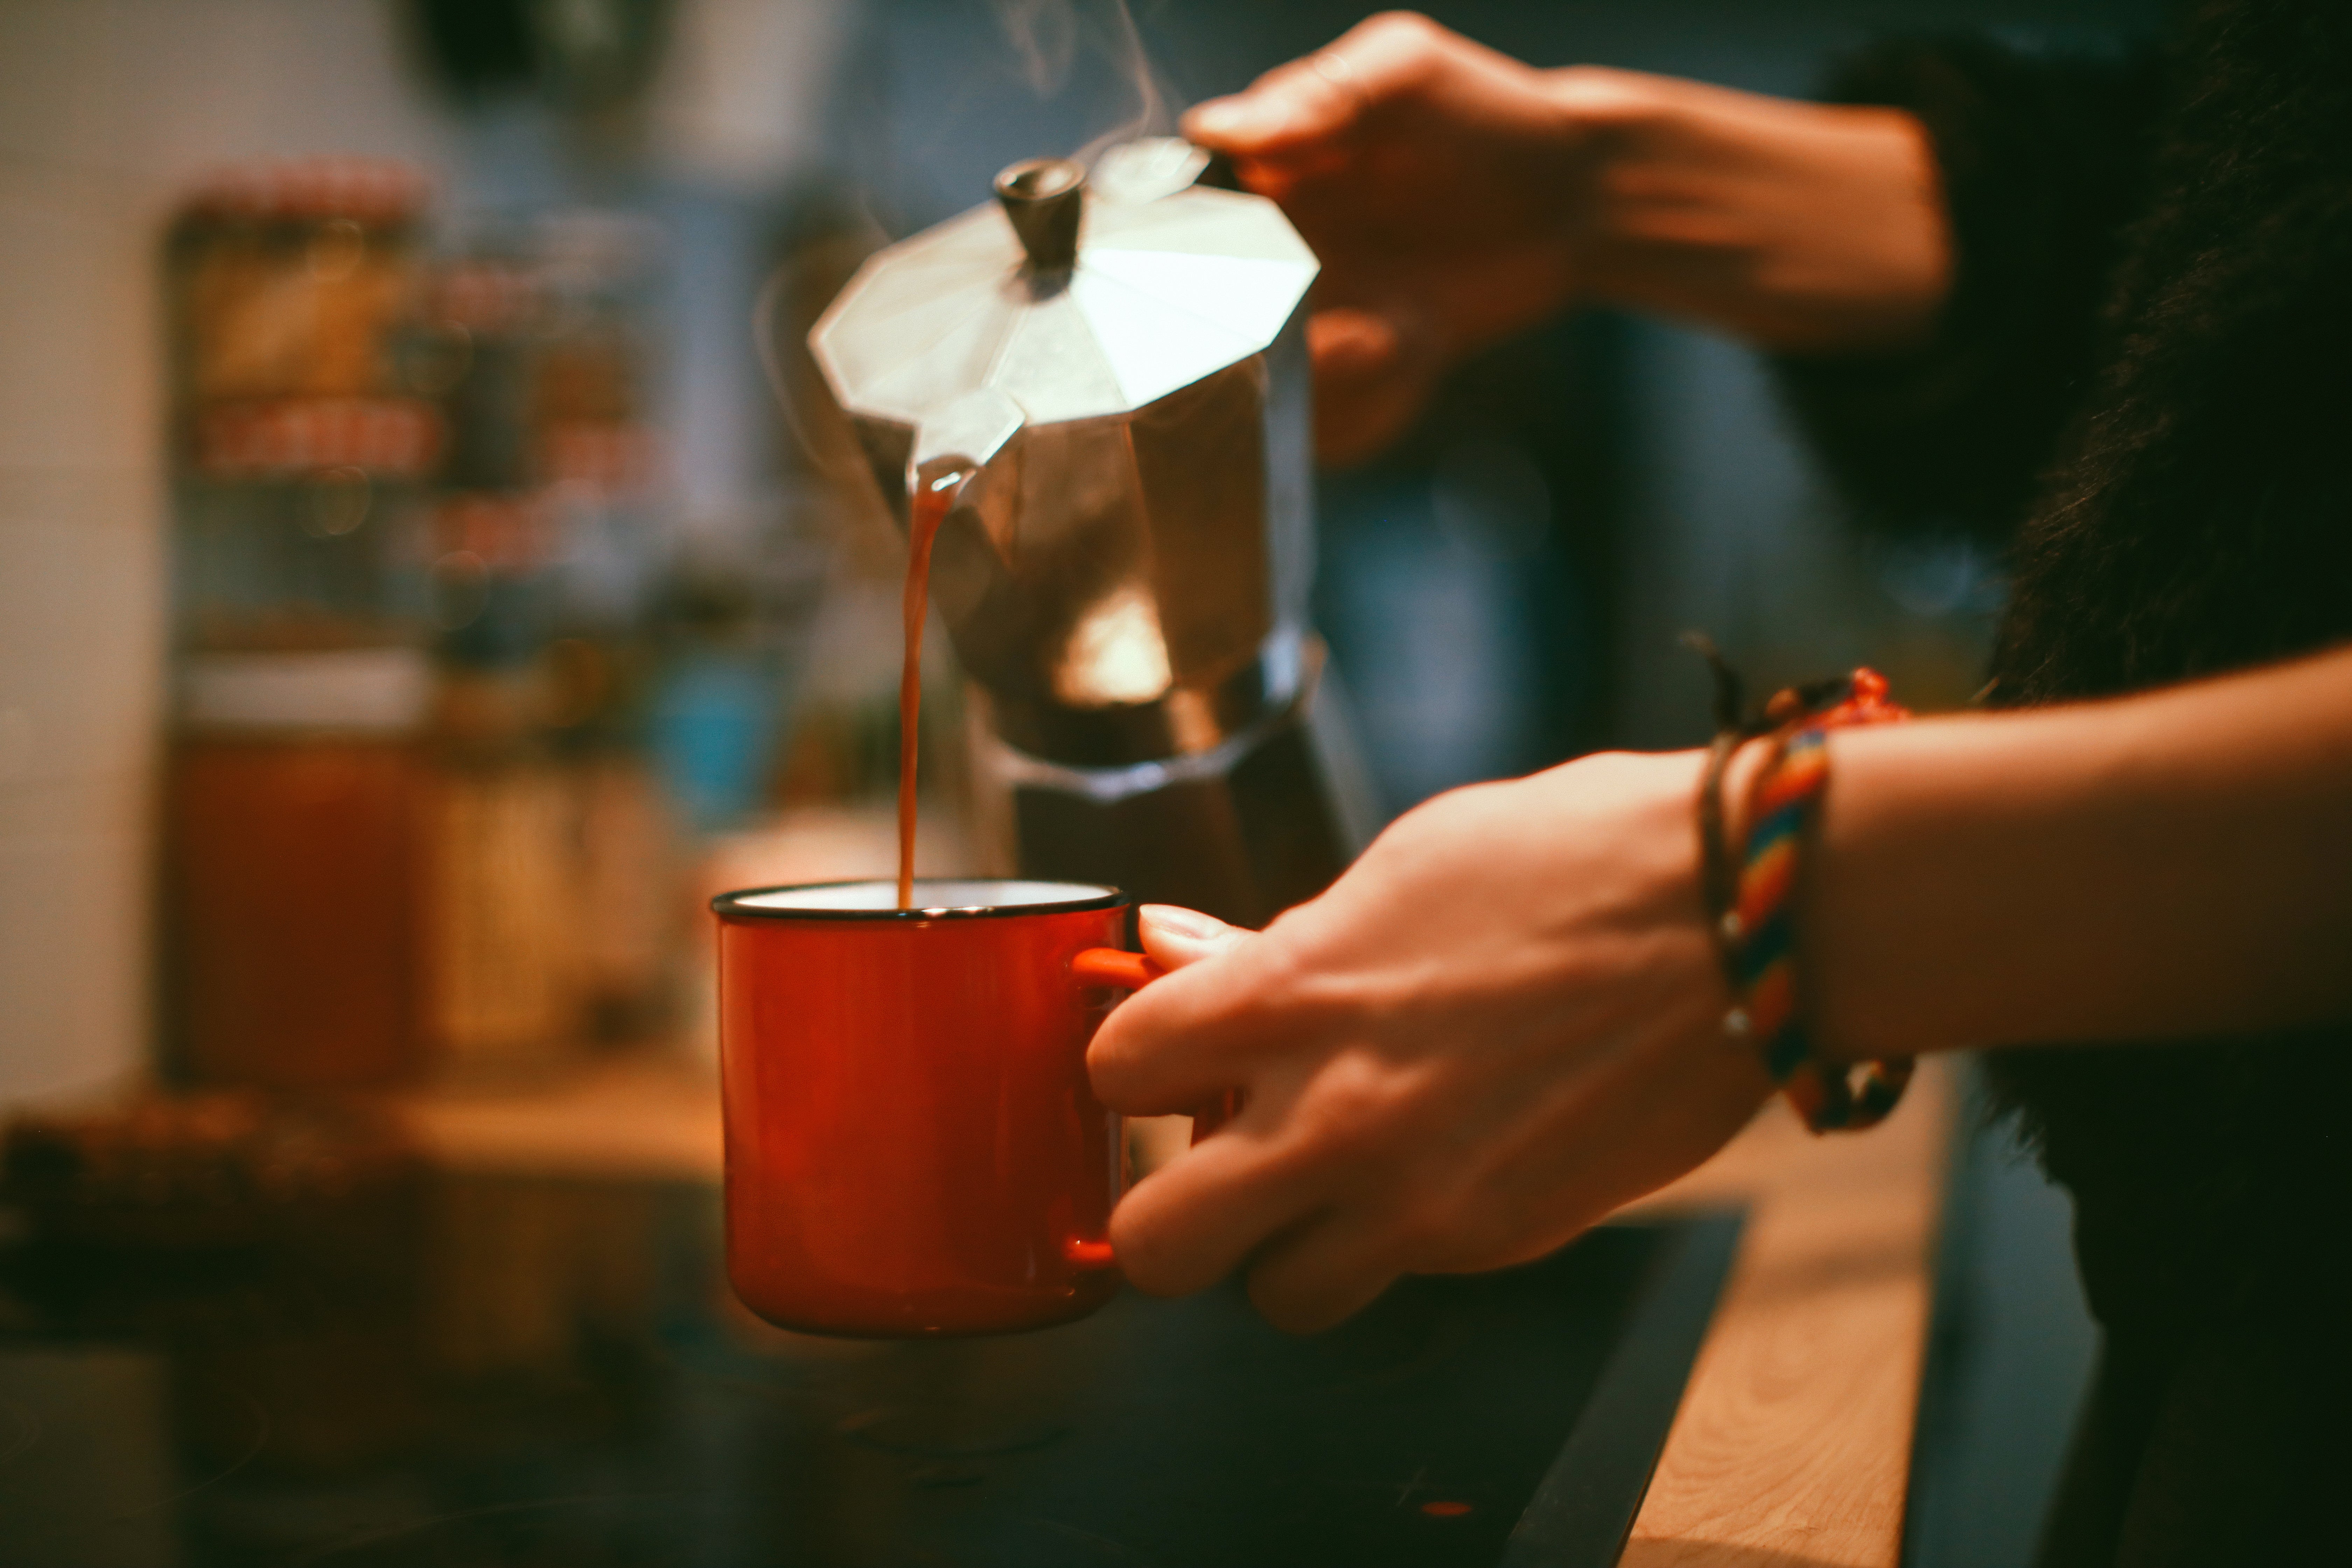 A woman’s hands while she’s pouring coffee into a cup